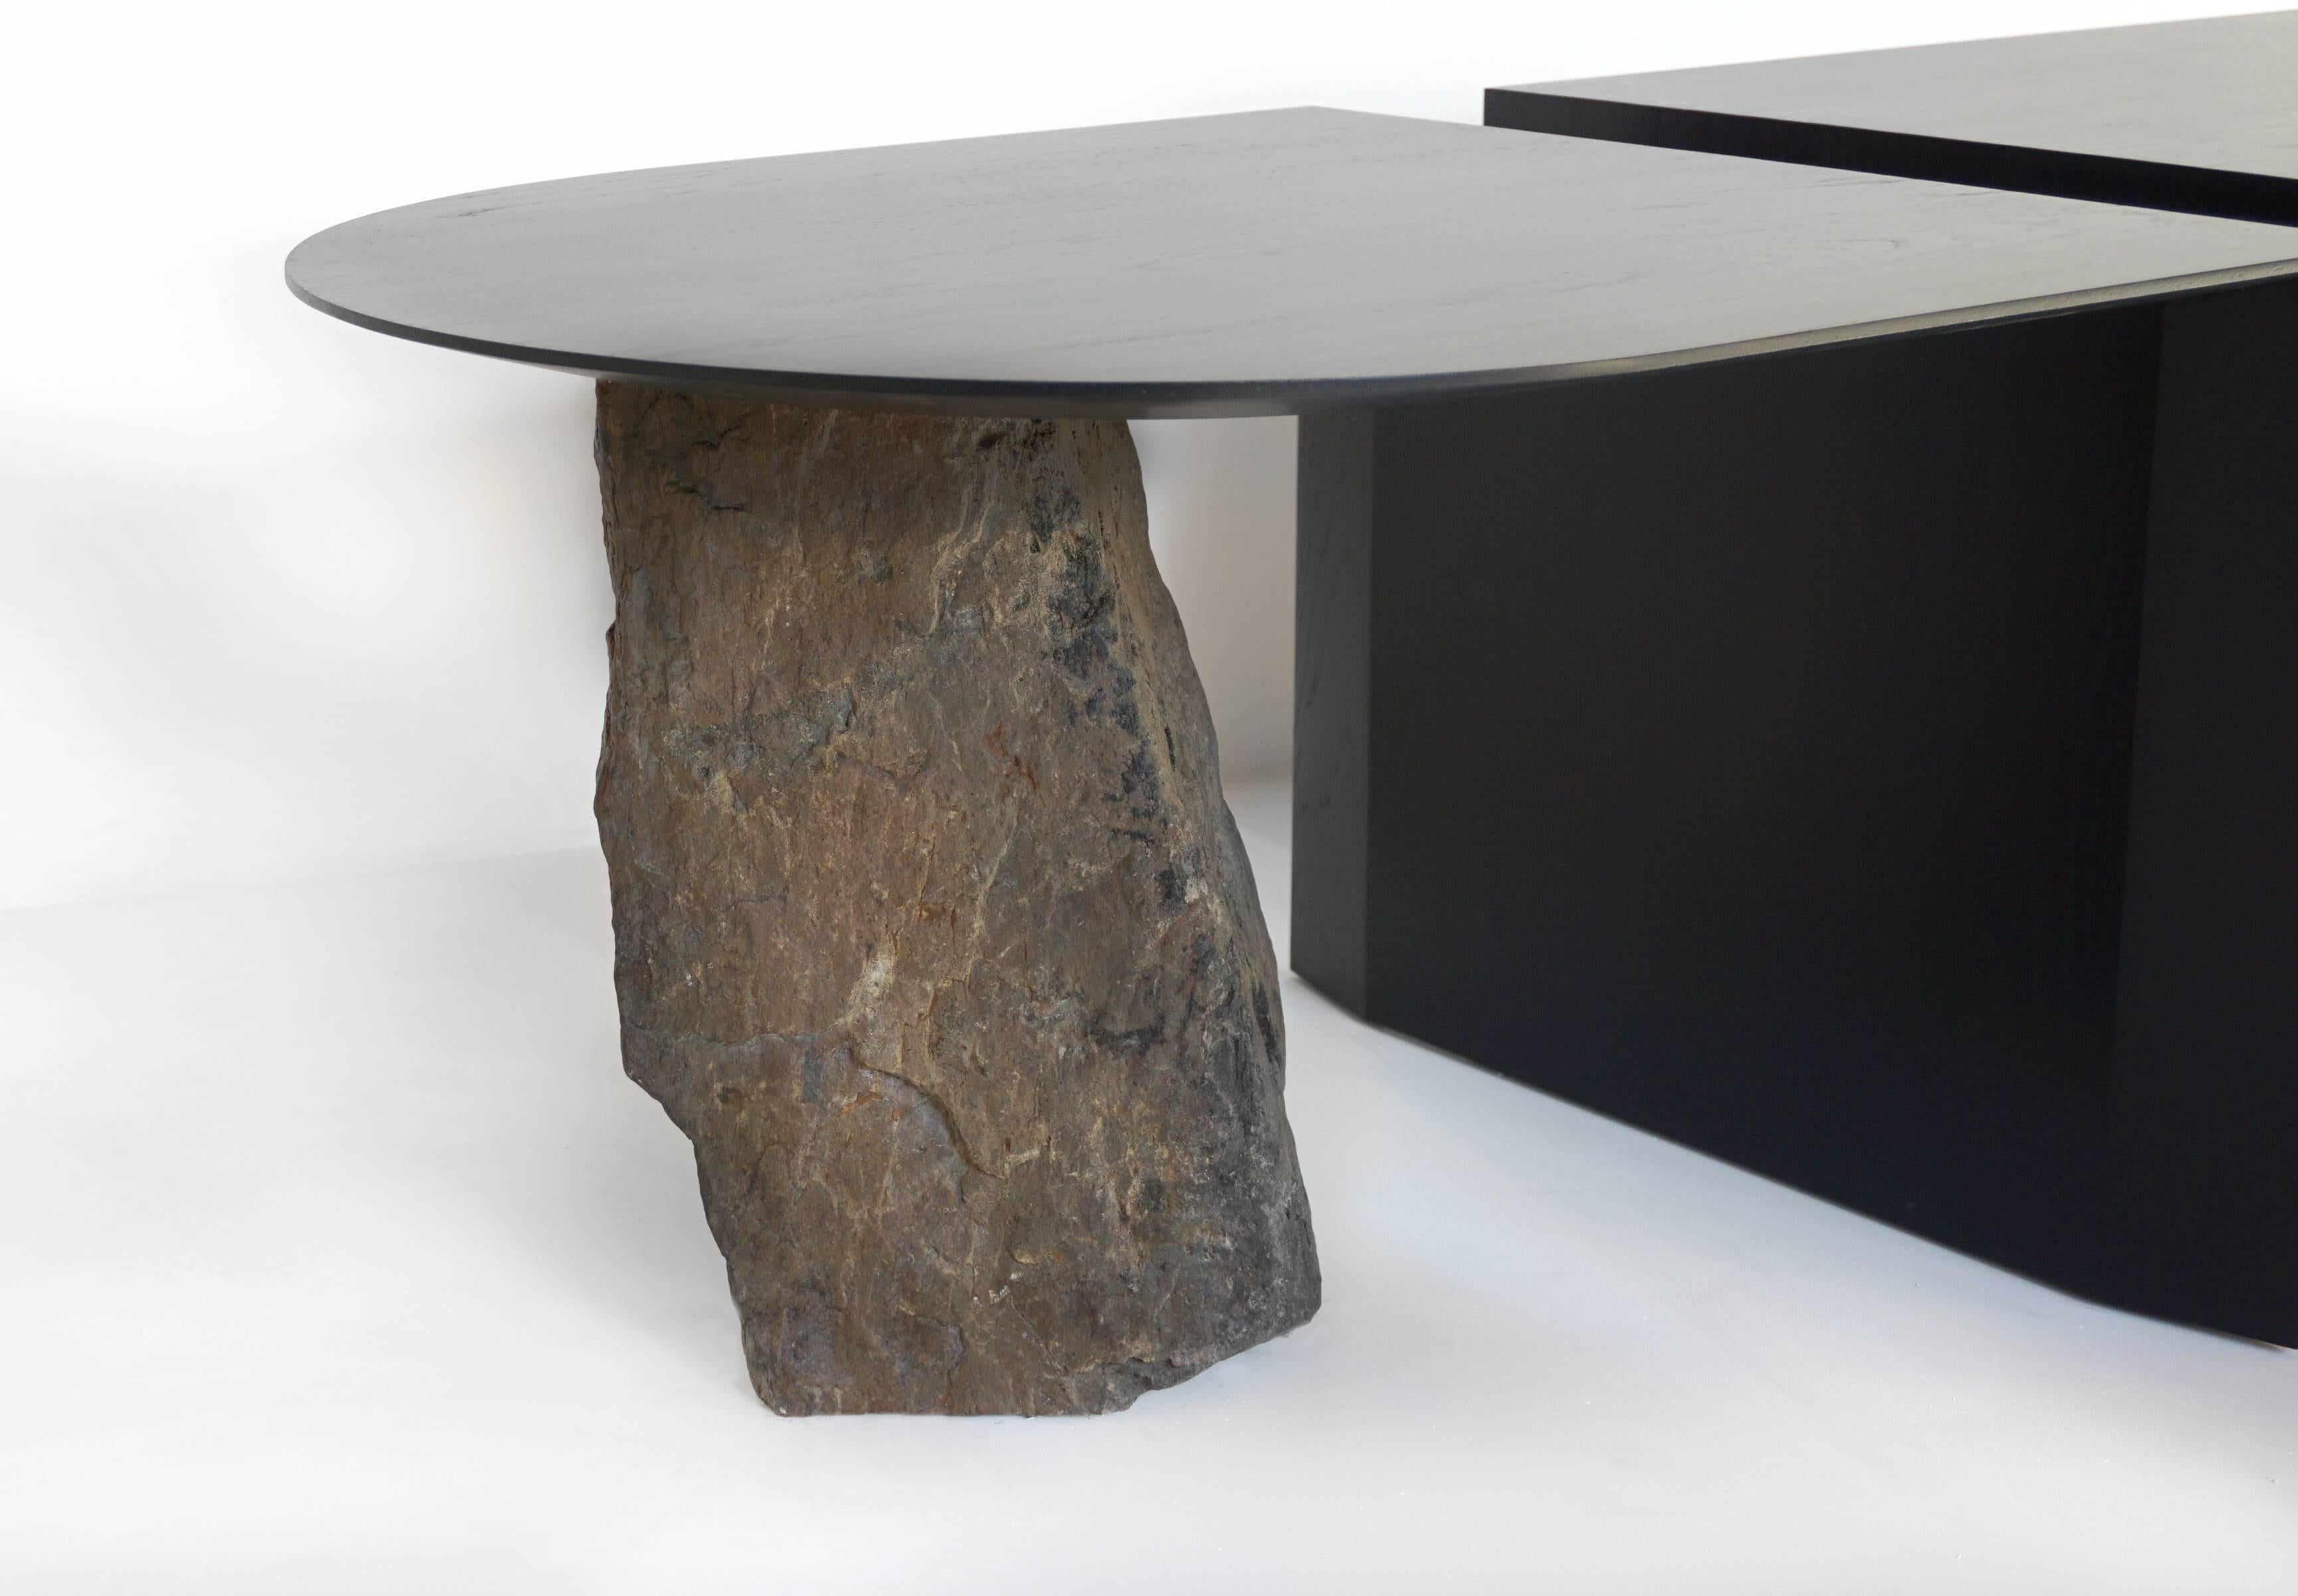 Missisquoi 01 is a numbered and asymmetrical two part coffee or cocktail table, with a space that divides it as the river divides the Missisquoi Valley. The black ashwood was felled, milled and dried near the studio, and the stone is from the